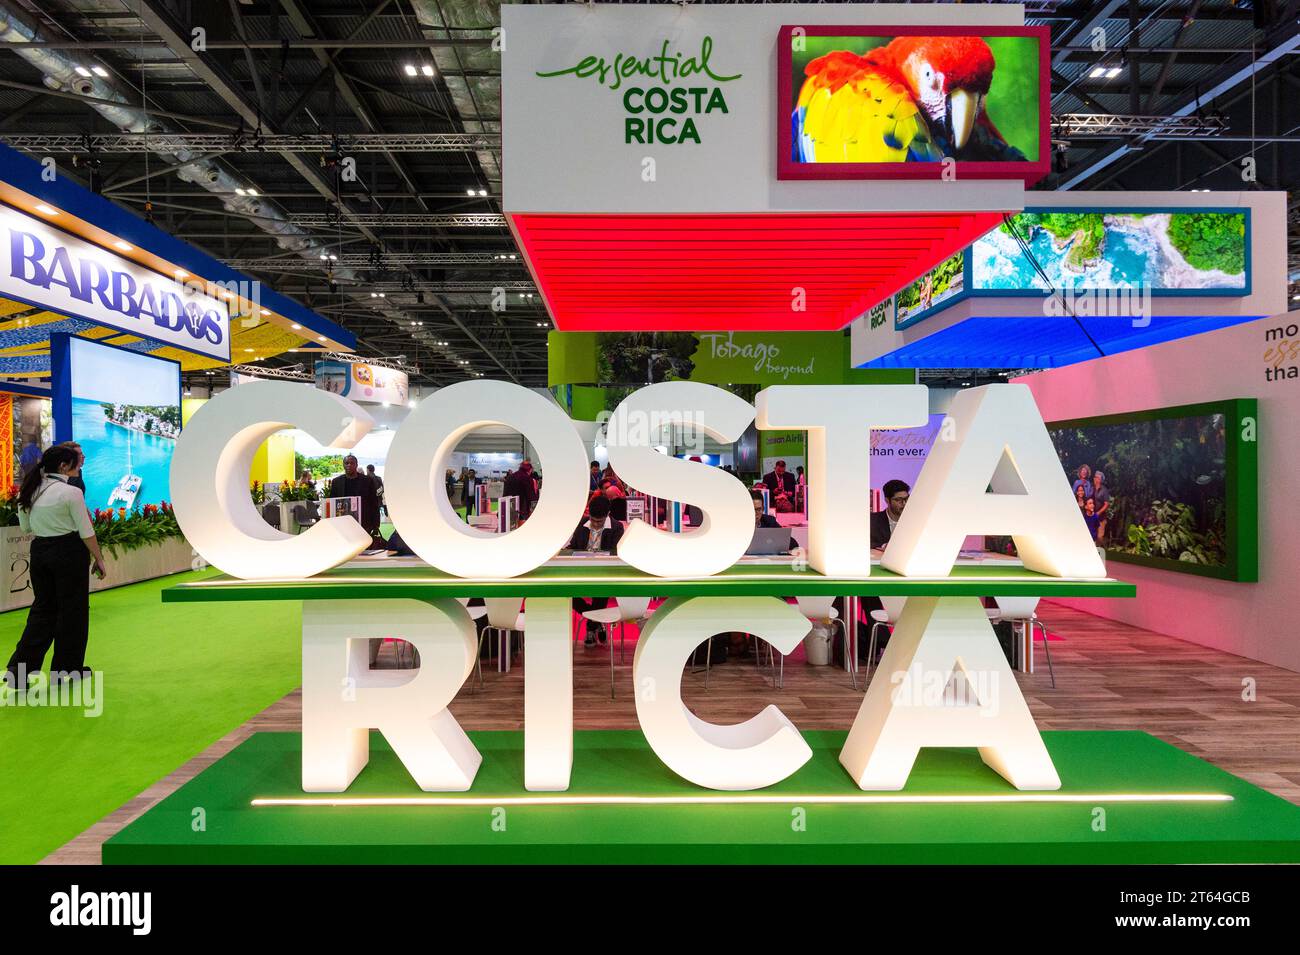 London, UK.  8 November 2023. The Costa Rica stand at World Travel Market London, a leading travel trade show being held at the Excel centre.  In the King’s Speech the previous day, the government announced a consumers’ bill which, if introduced, would ban ‘drip pricing’, the practice where businesses advertise only part of a product’s price upfront and reveal other charges later in the buying process.  The airline industry is such an example, where the charging extra for luggage, seat selection, travel insurance or food and drink vouchers is common.  Credit: Stephen Chung / Alamy Live News Stock Photo